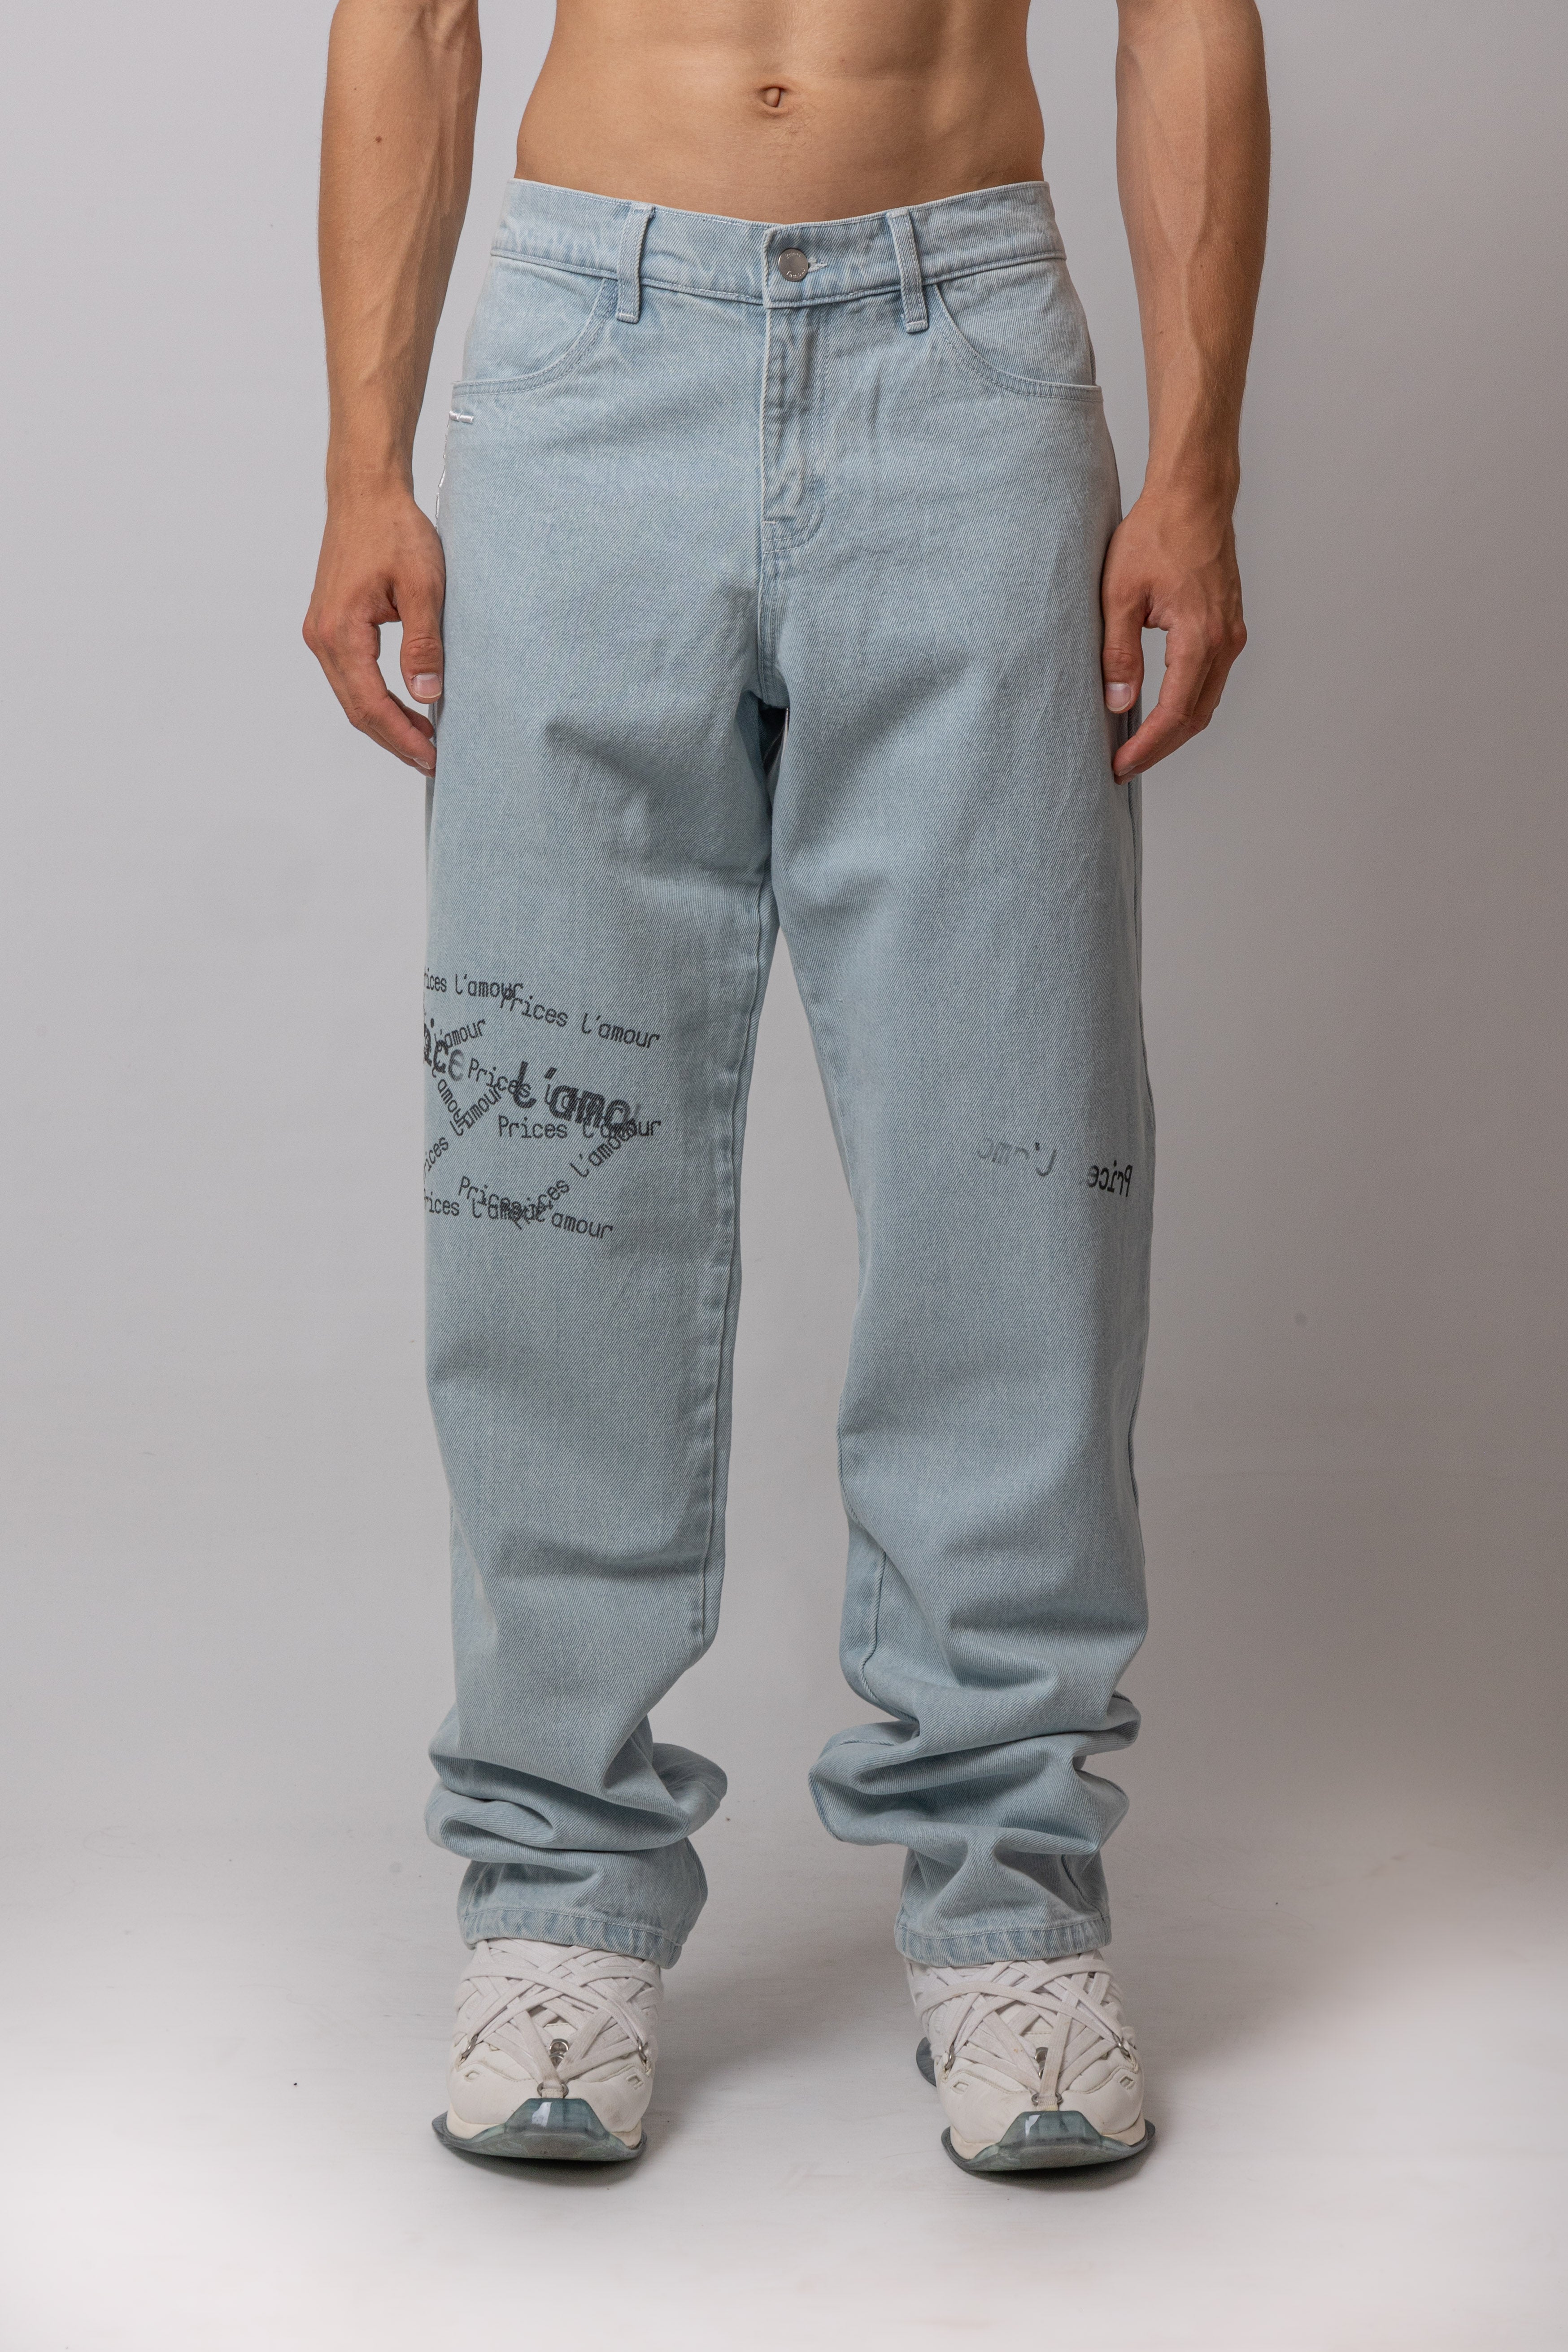 BLEACHED LOGO JEANS – Prices l´amour